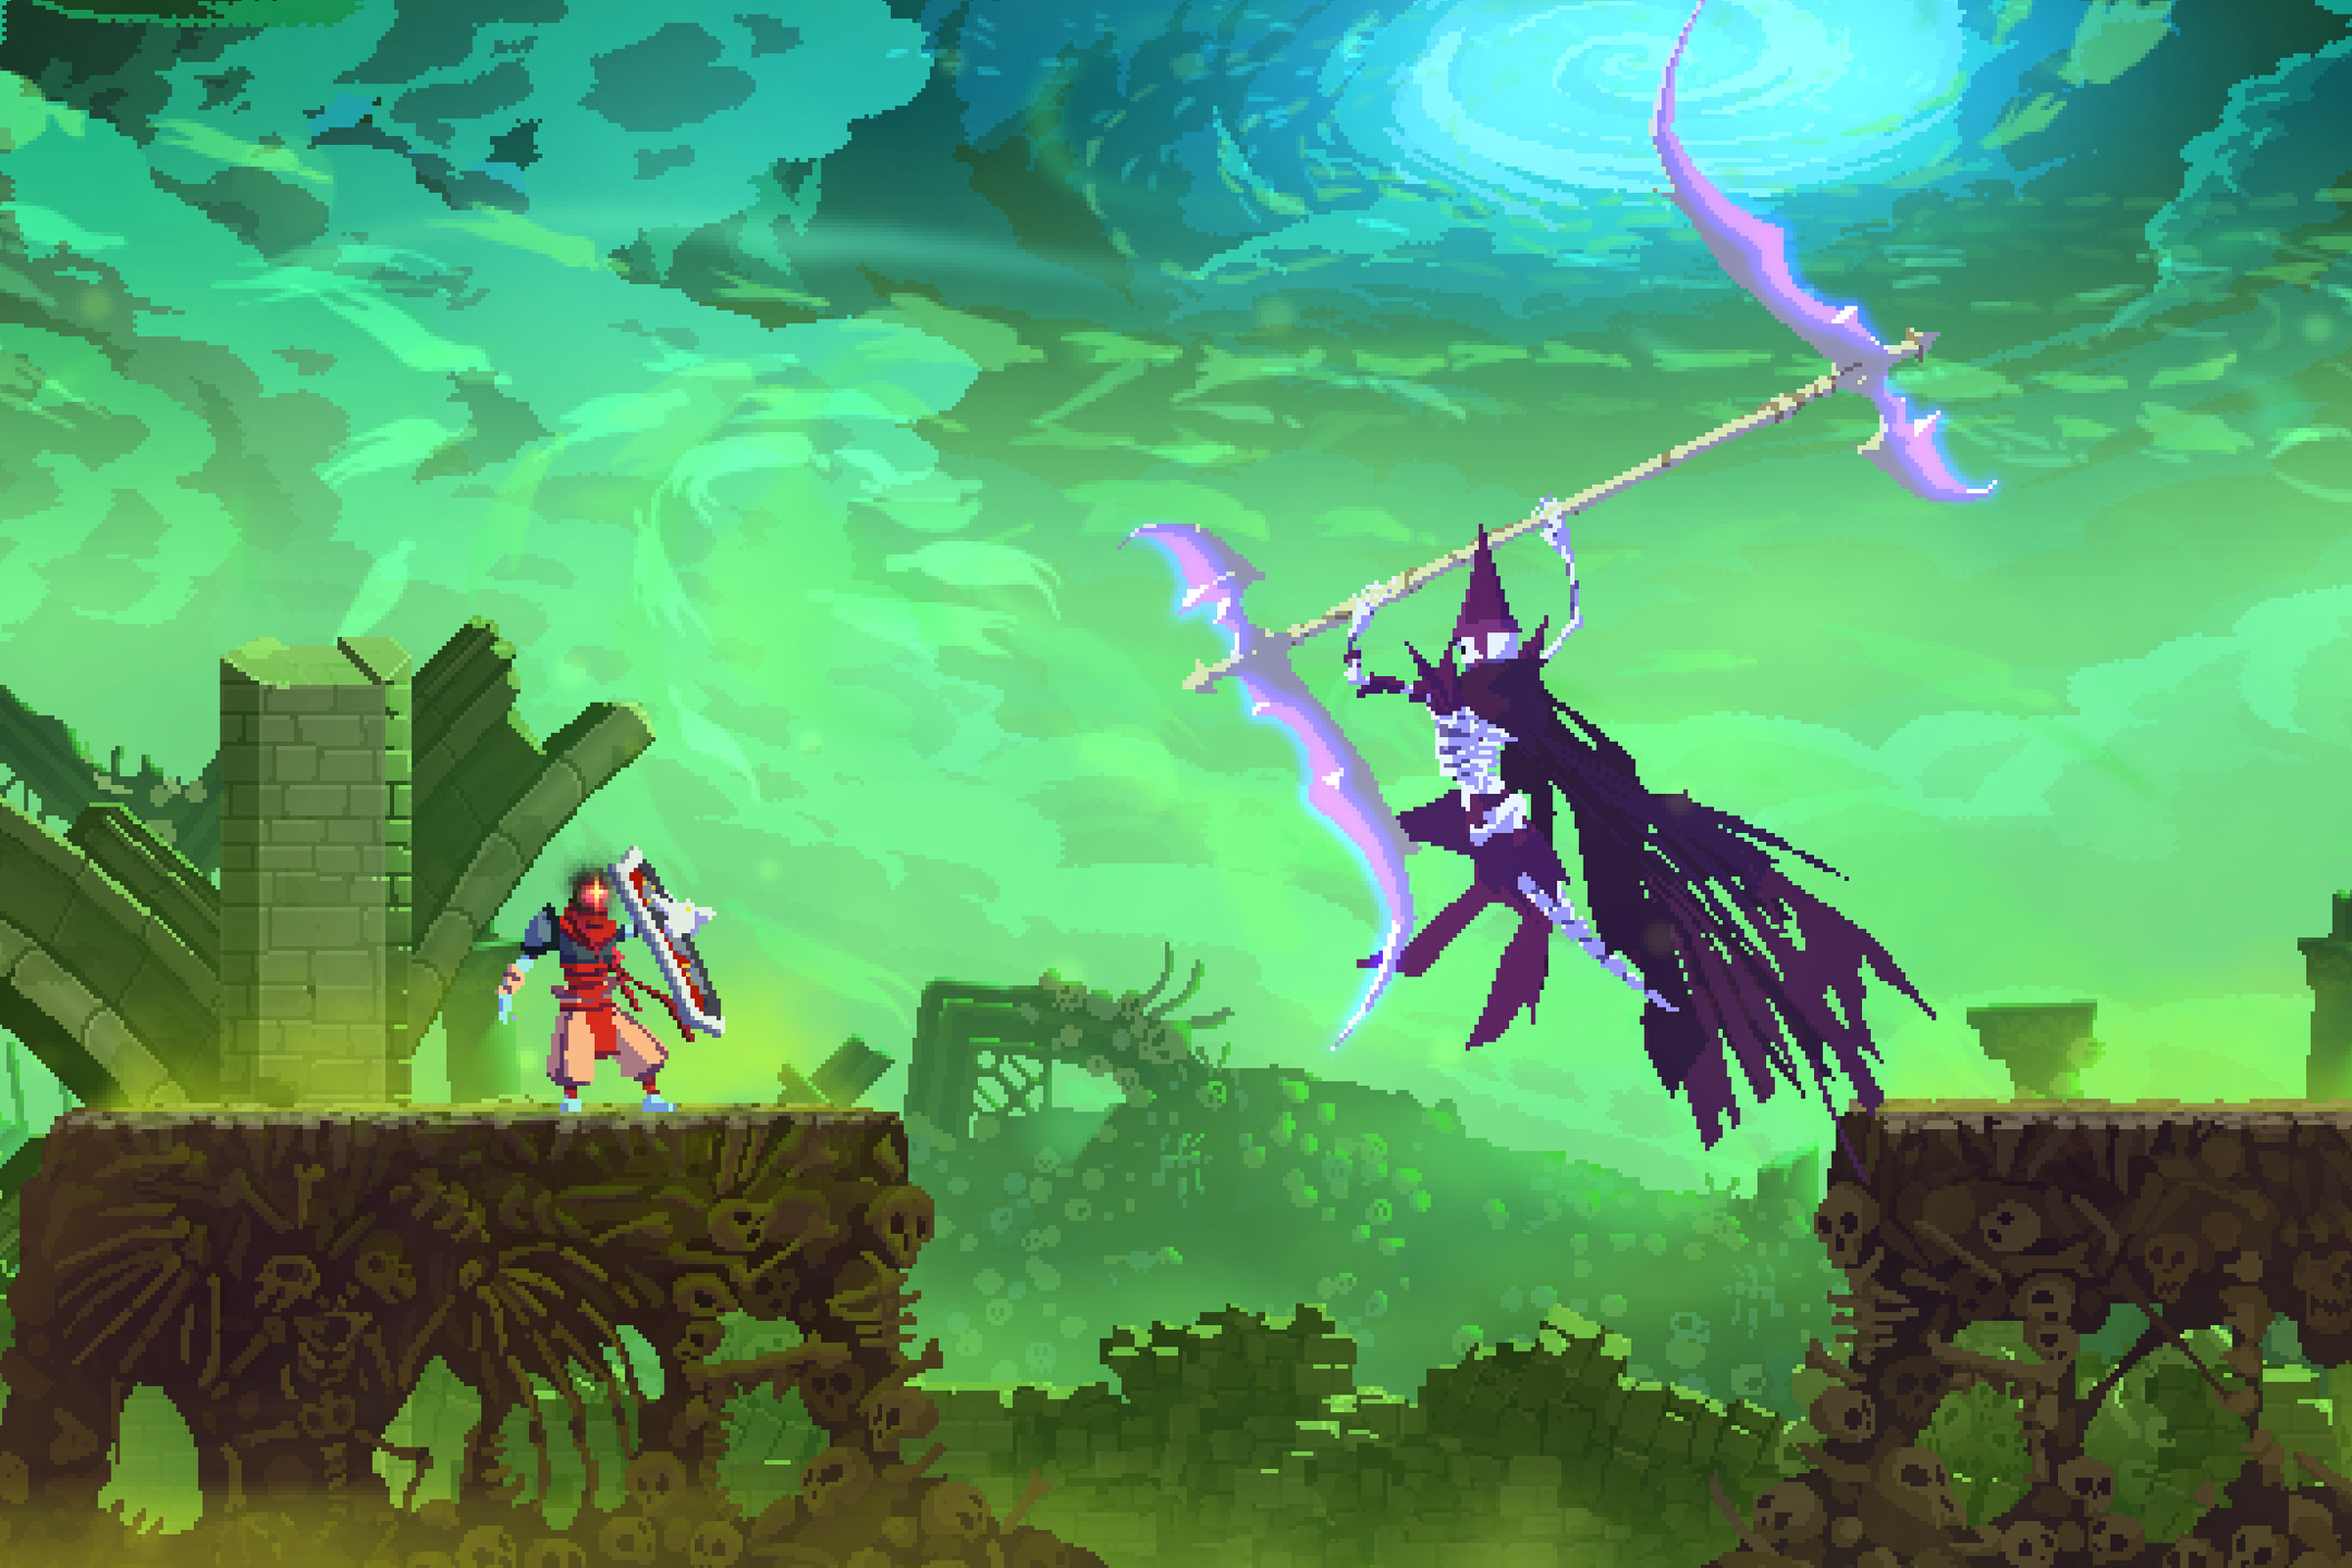 A screenshot from Dead Cells: Return to Castlevania.